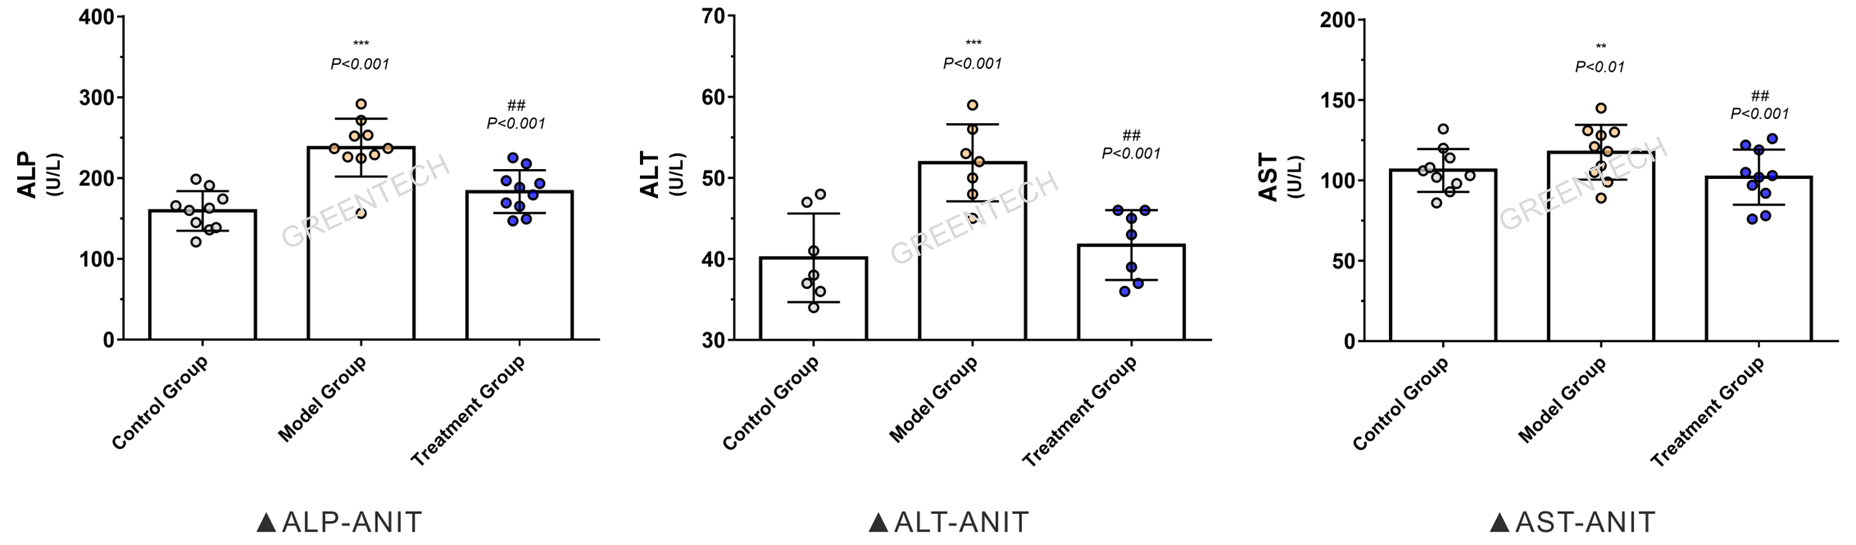 Evaluation of function of liver and gall in SD rats 4 weeks after ANIT induction.png